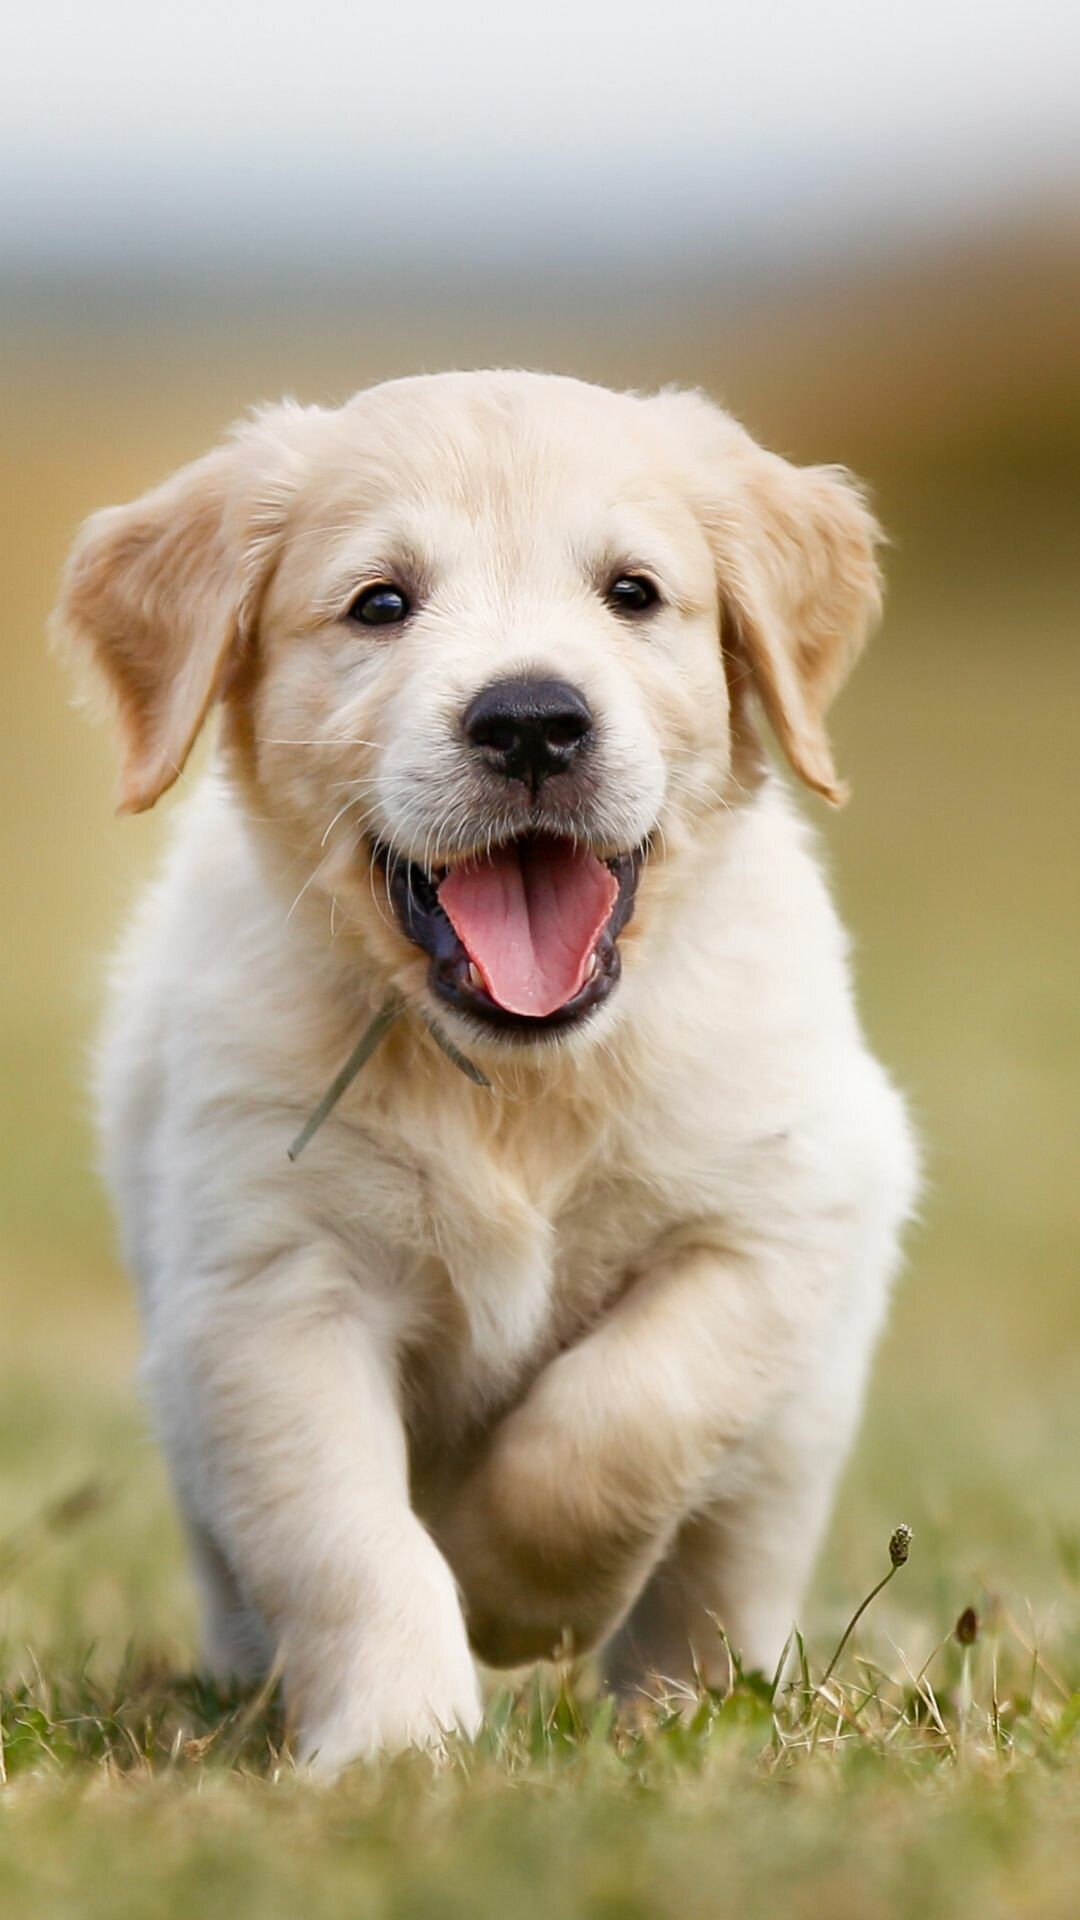 Puppy: Golden Retriever, Characterized by a gentle and affectionate nature and a striking golden coat. 1080x1920 Full HD Background.